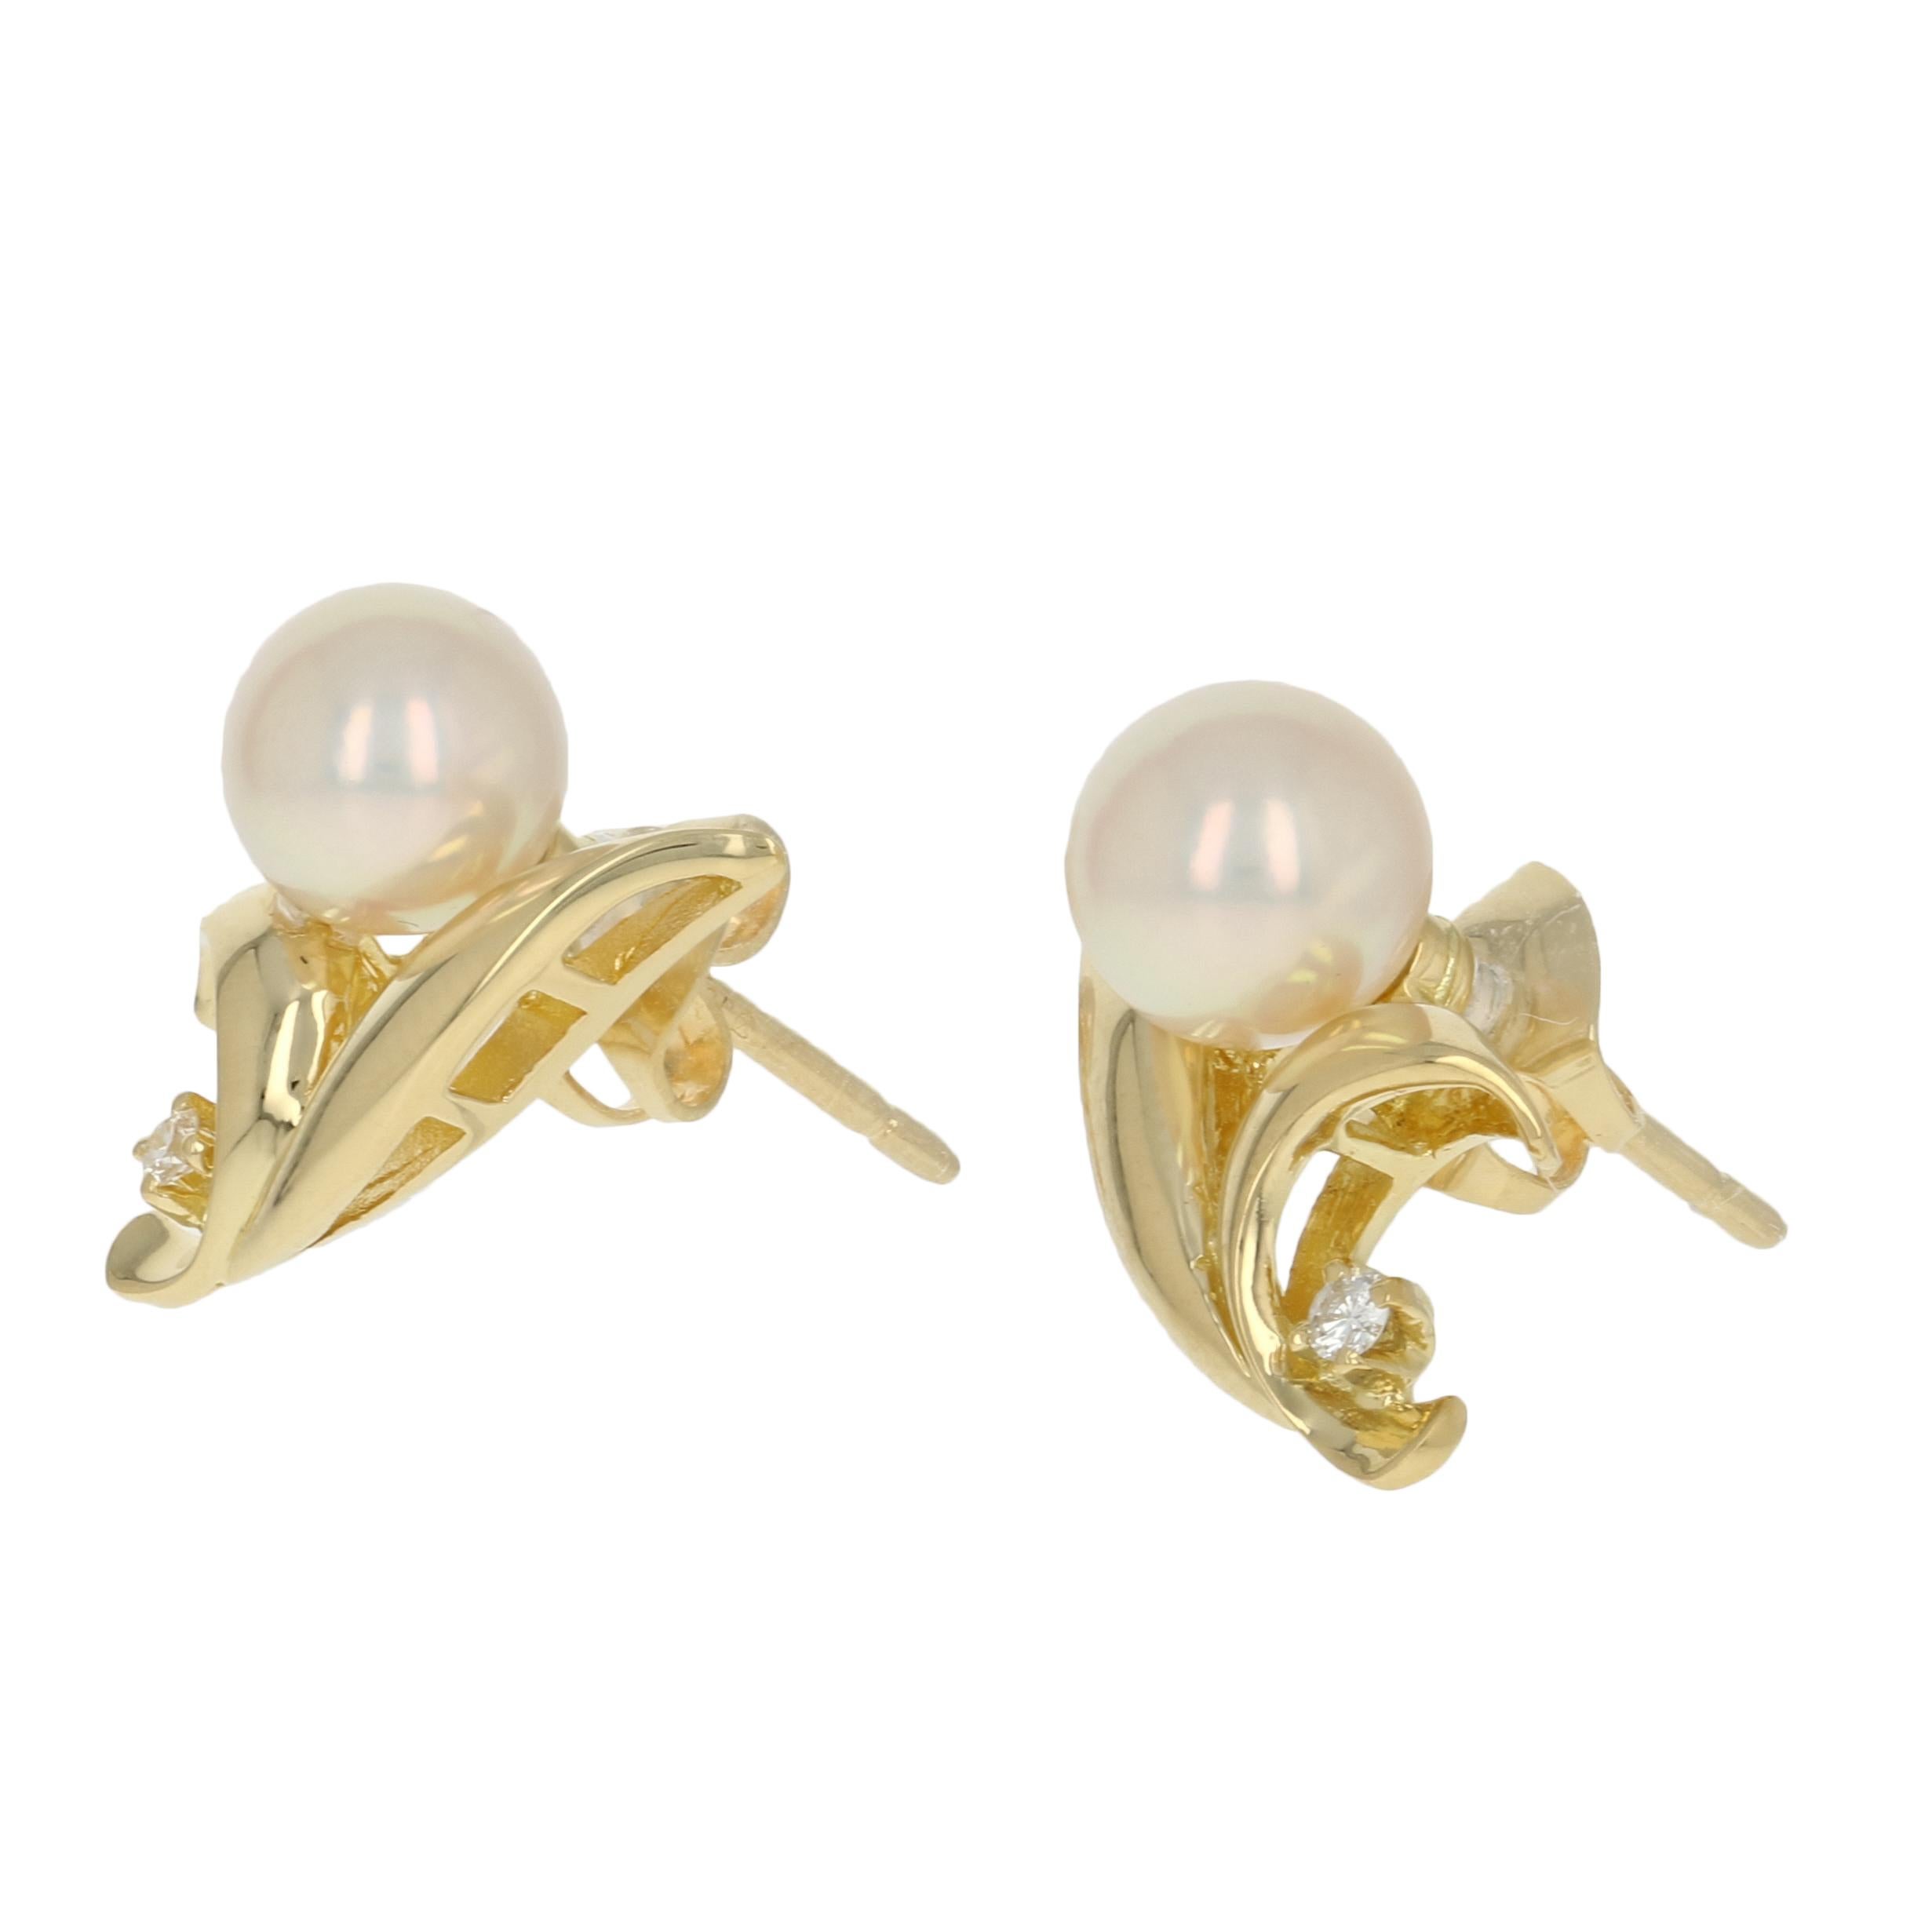 Gracefully elegant and refined, these Mikimoto earrings are destined to become a signature set in your jewelry collection! This pair of 18k yellow gold studs host luminous Akoya pearls sweetly accompanied by radiant white diamond accents.   

Metal